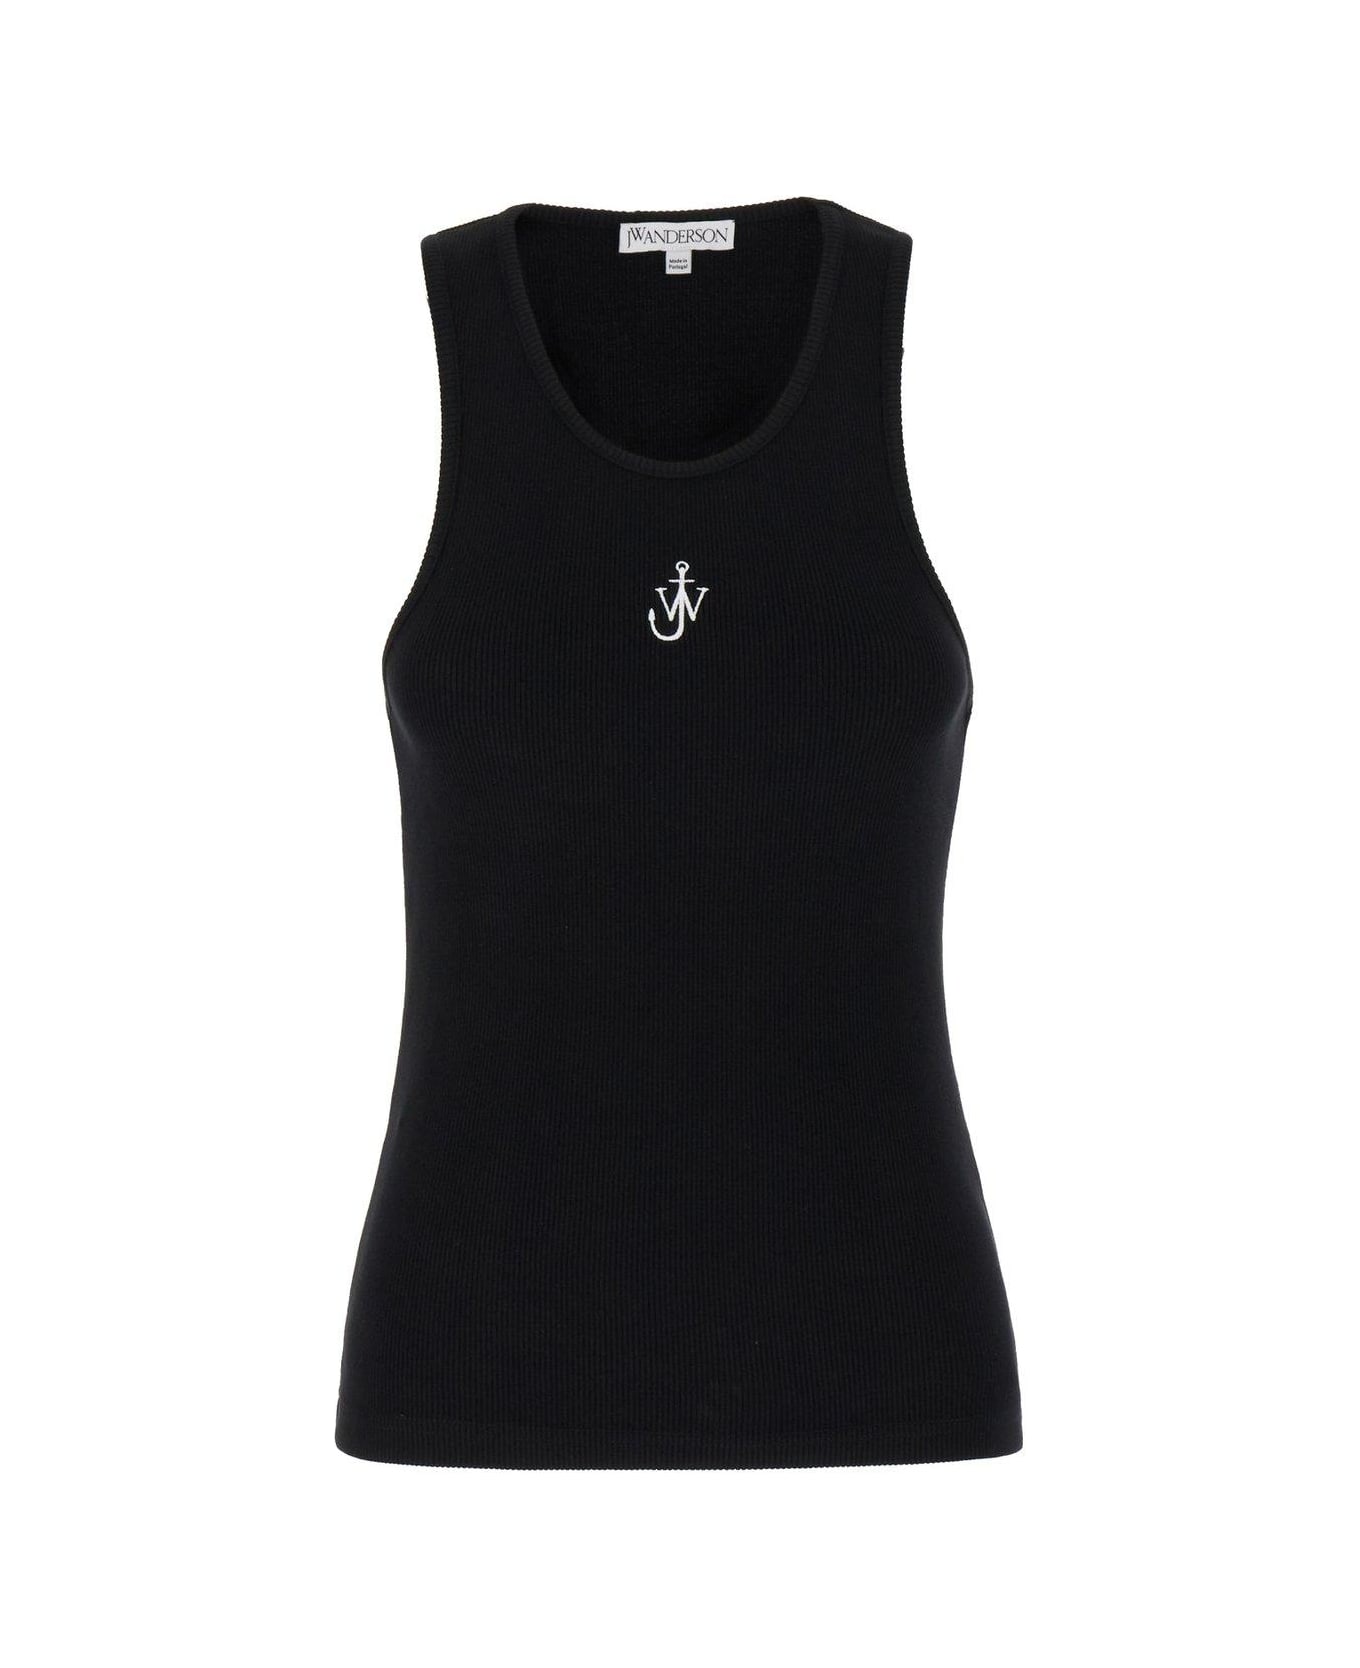 J.W. Anderson Anchor Logo Embroidered Tank Top - Black